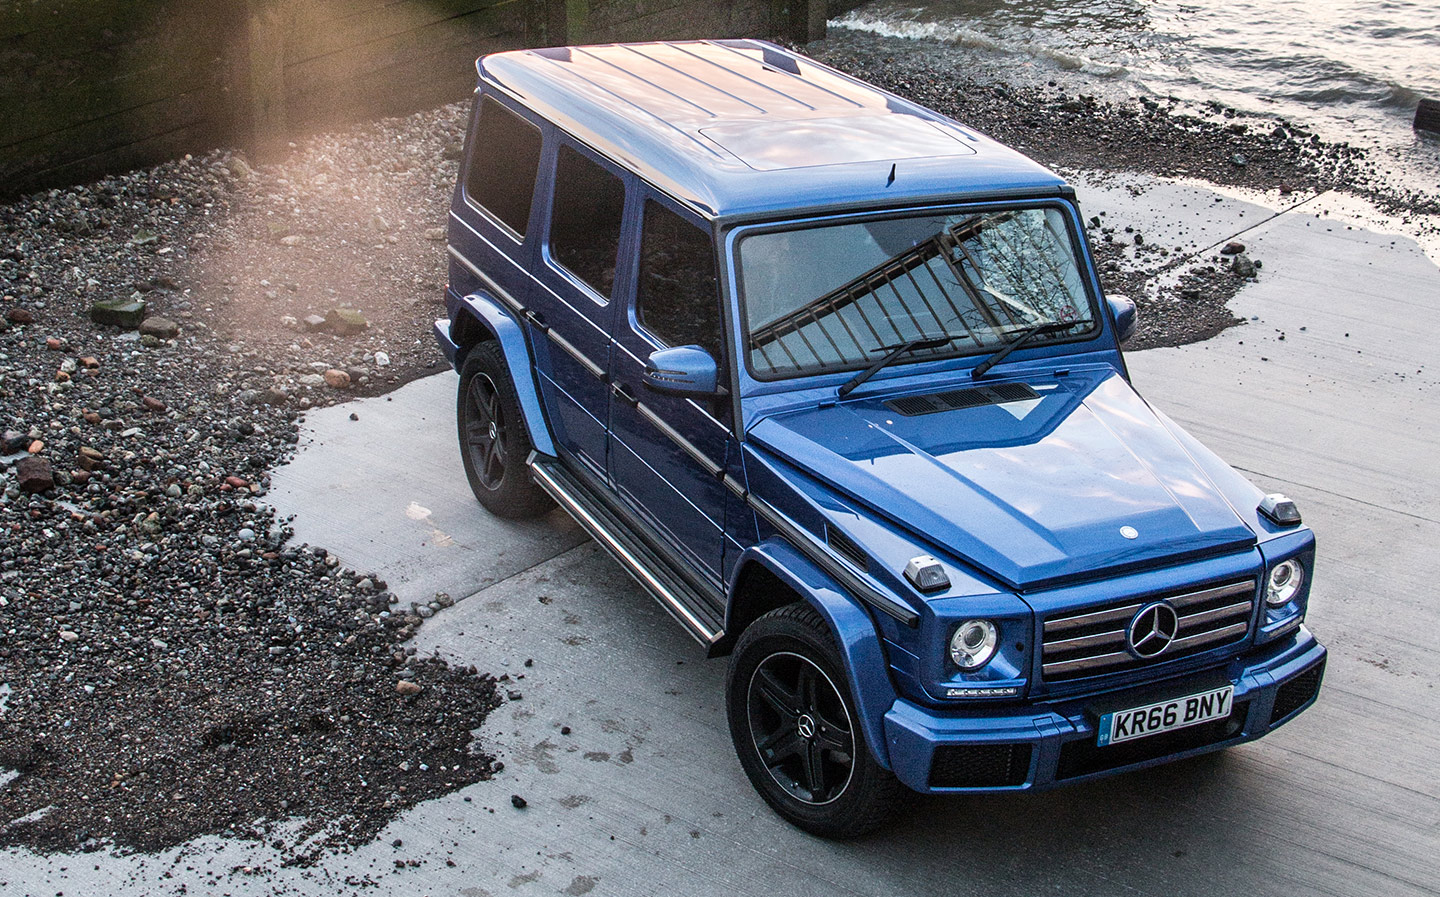 G-Force: the Mercedes G-Class is a Tonka toy for grown-ups